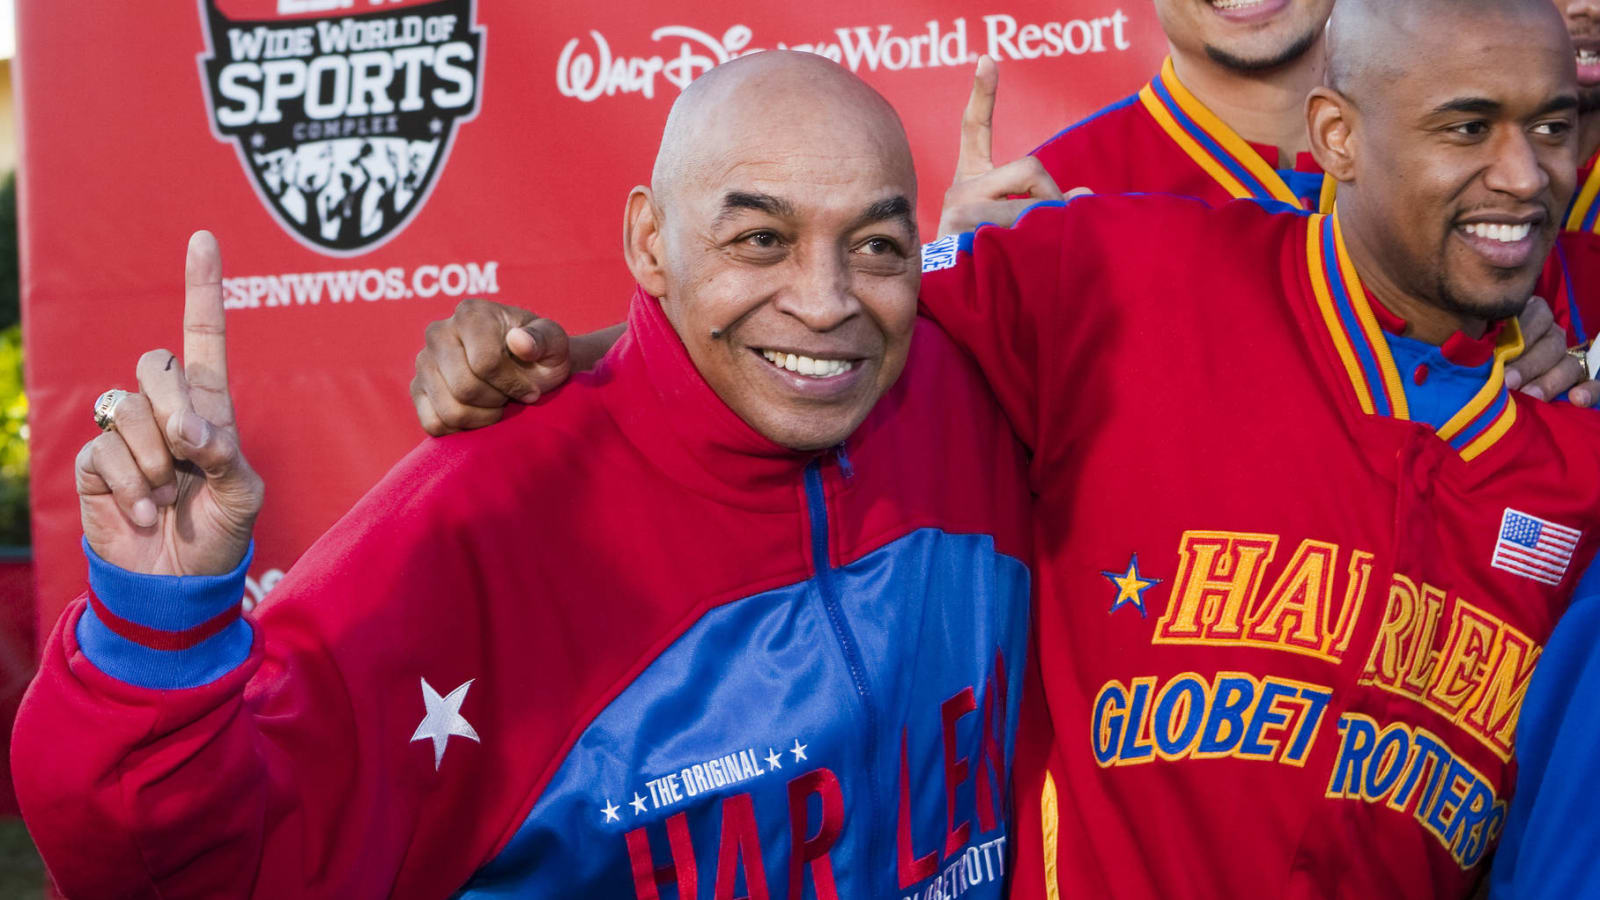 Harlem Globetrotters legend Curly Neal dies at age 77